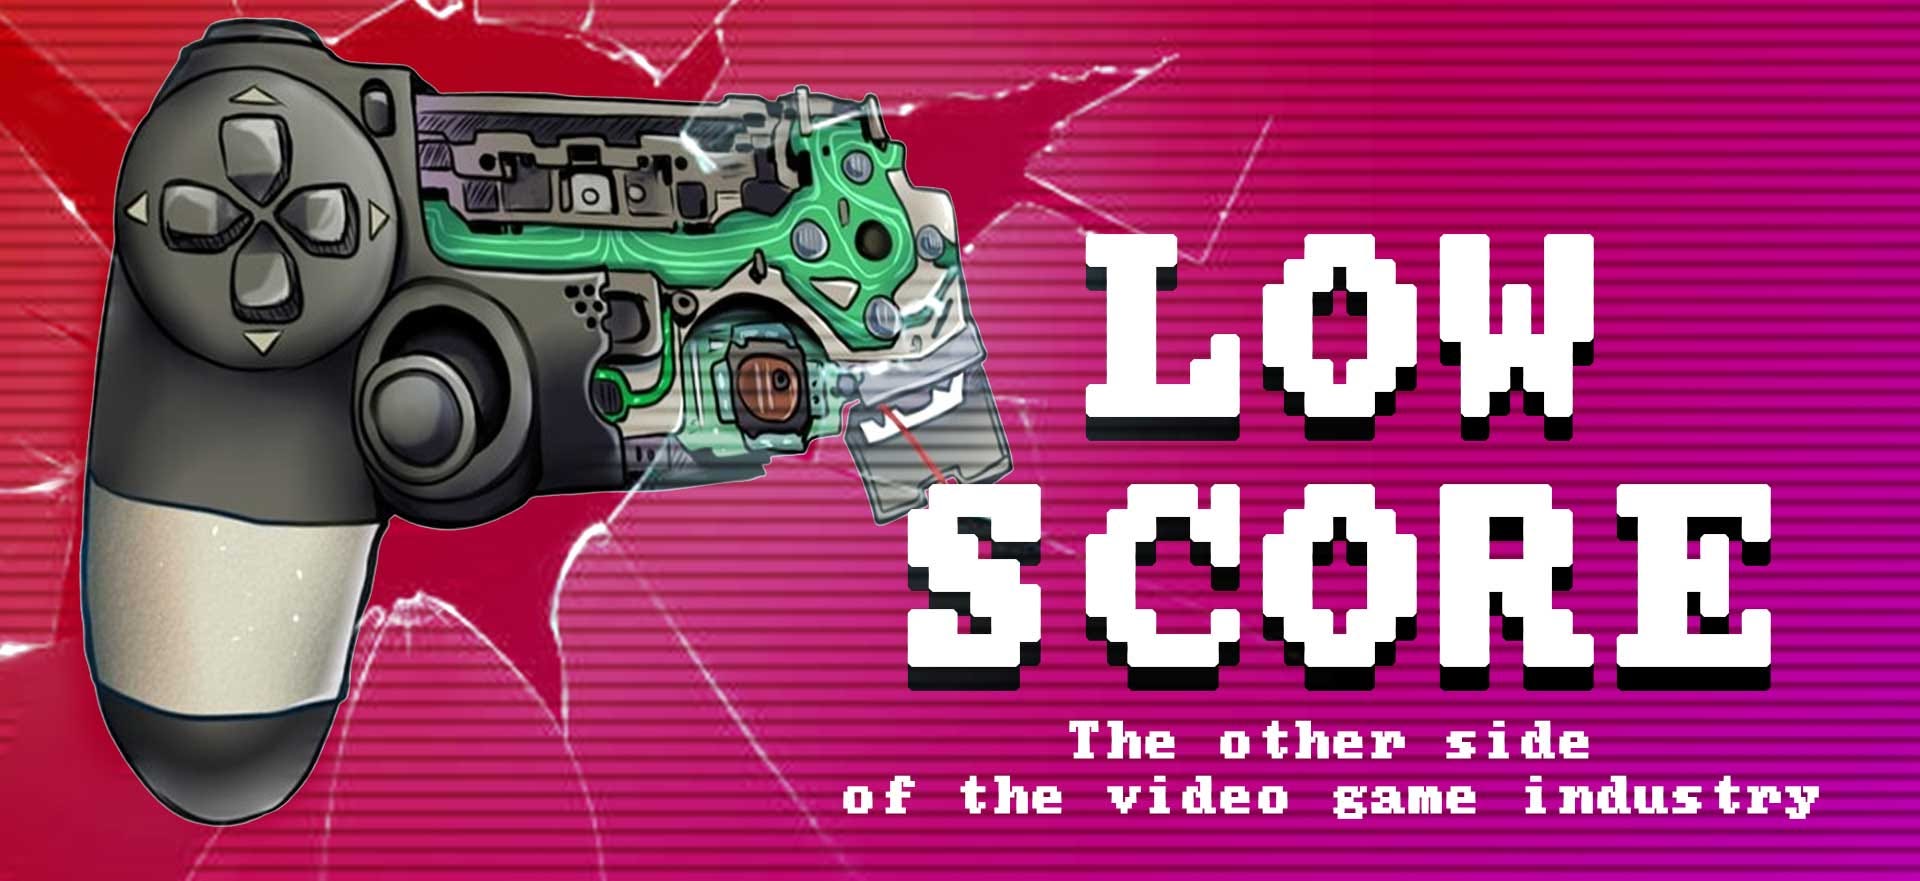 Low Score A Documentary About The Other Side Of The Video Game Industry By Felipe Pepe Sep 2020 Medium - dungeon quest roblox weapons best to worst